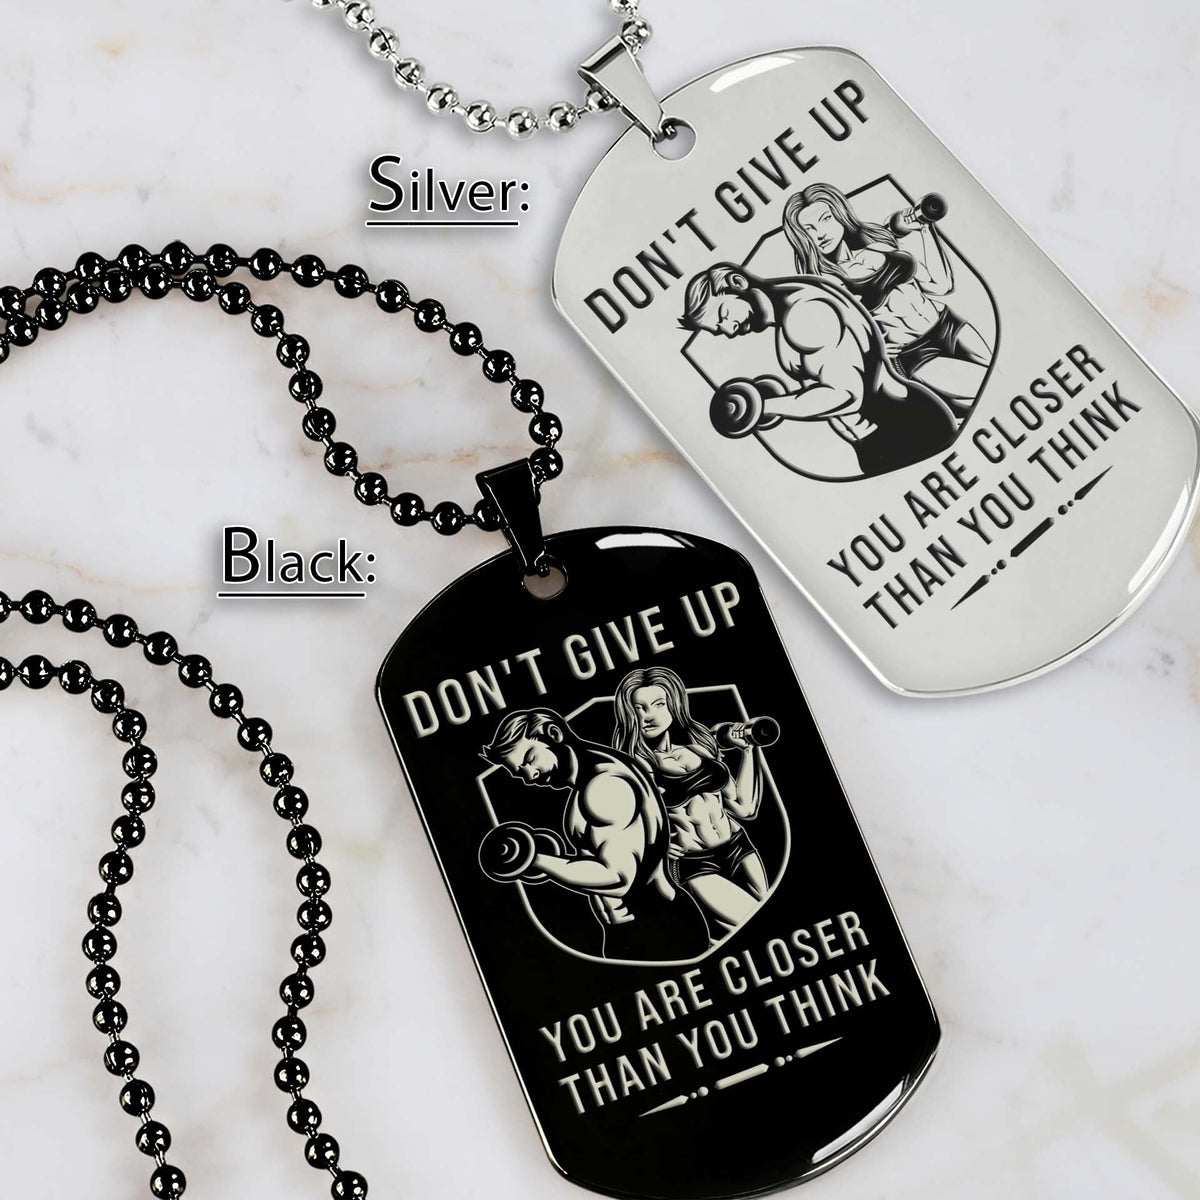 Don't Give Up You Are Closer Than You Think - It's About Being Better Than You Were The Day Before - Gym - Fitness Center - Workout - Gym Dog Tag - Gym Necklace - Engrave Dog Tag